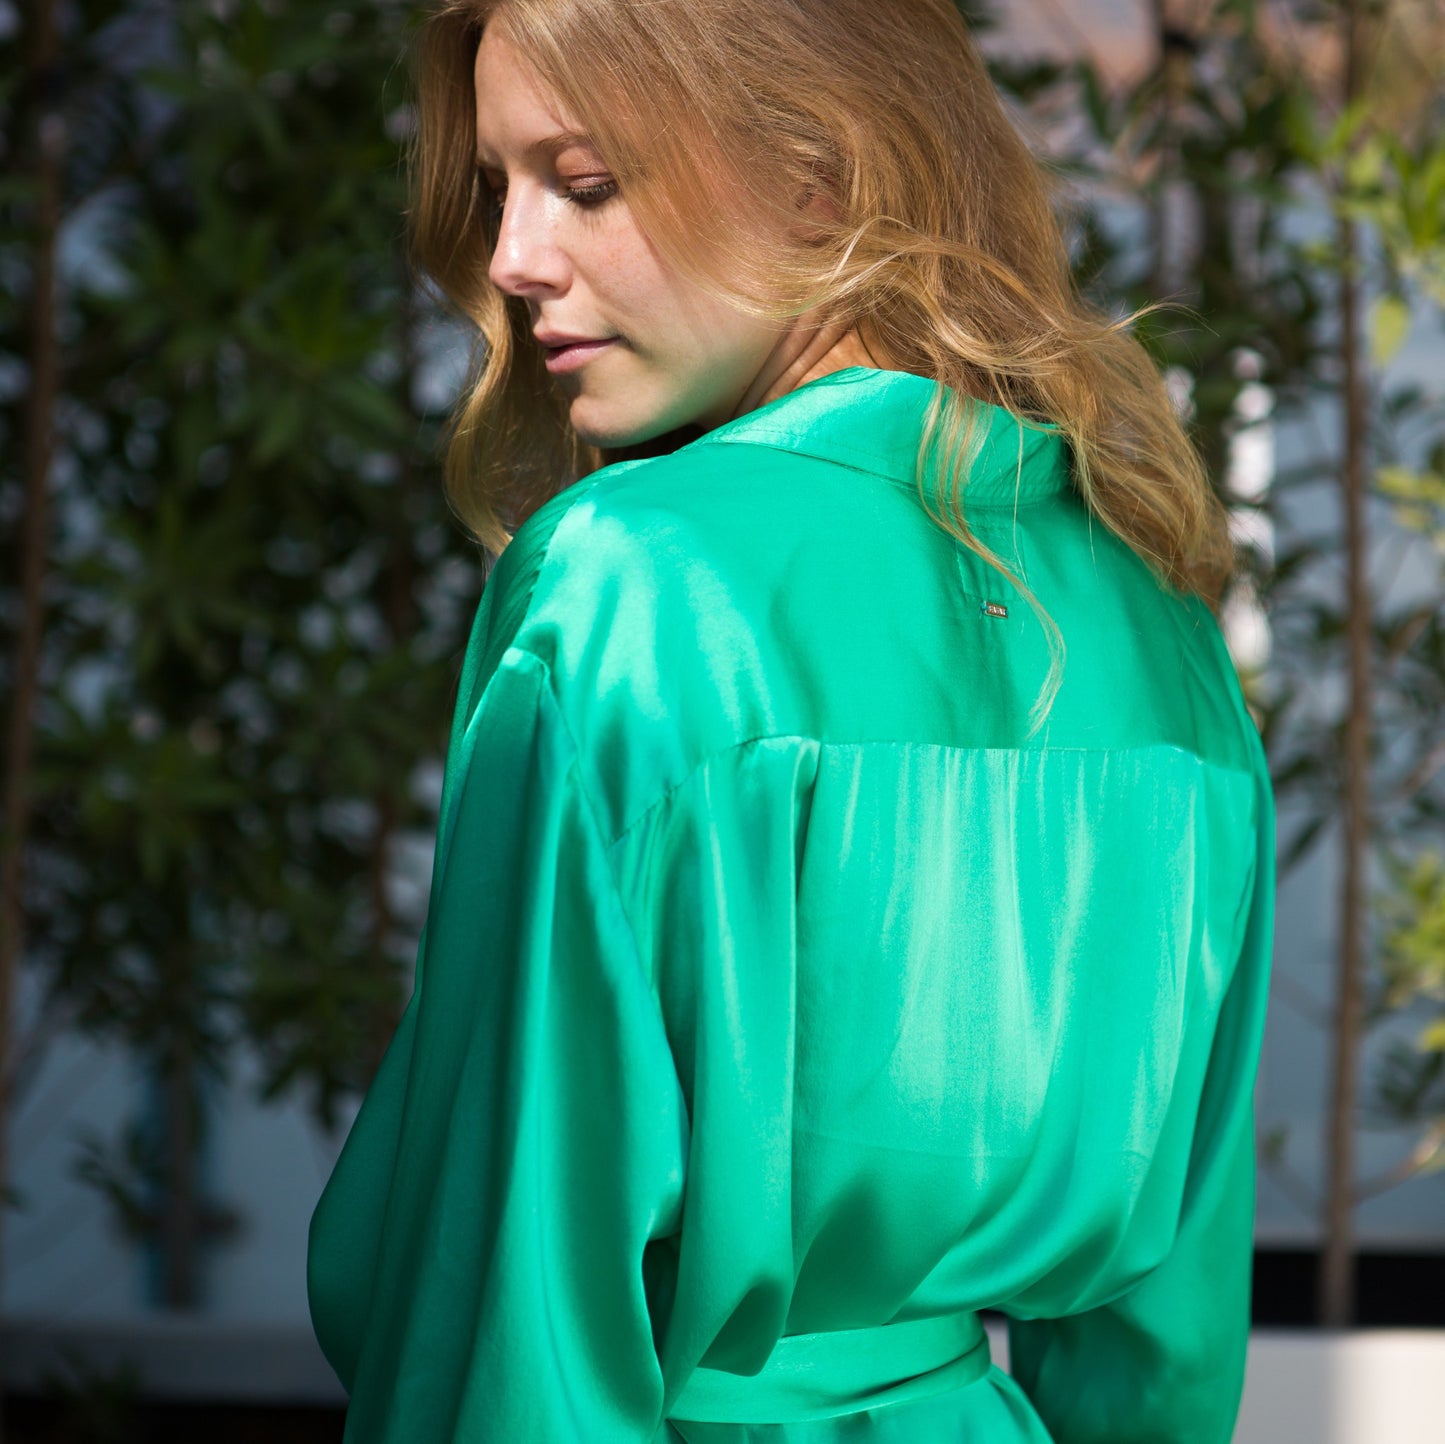 Classic one-size silk shirt dress in mint for a timeless look